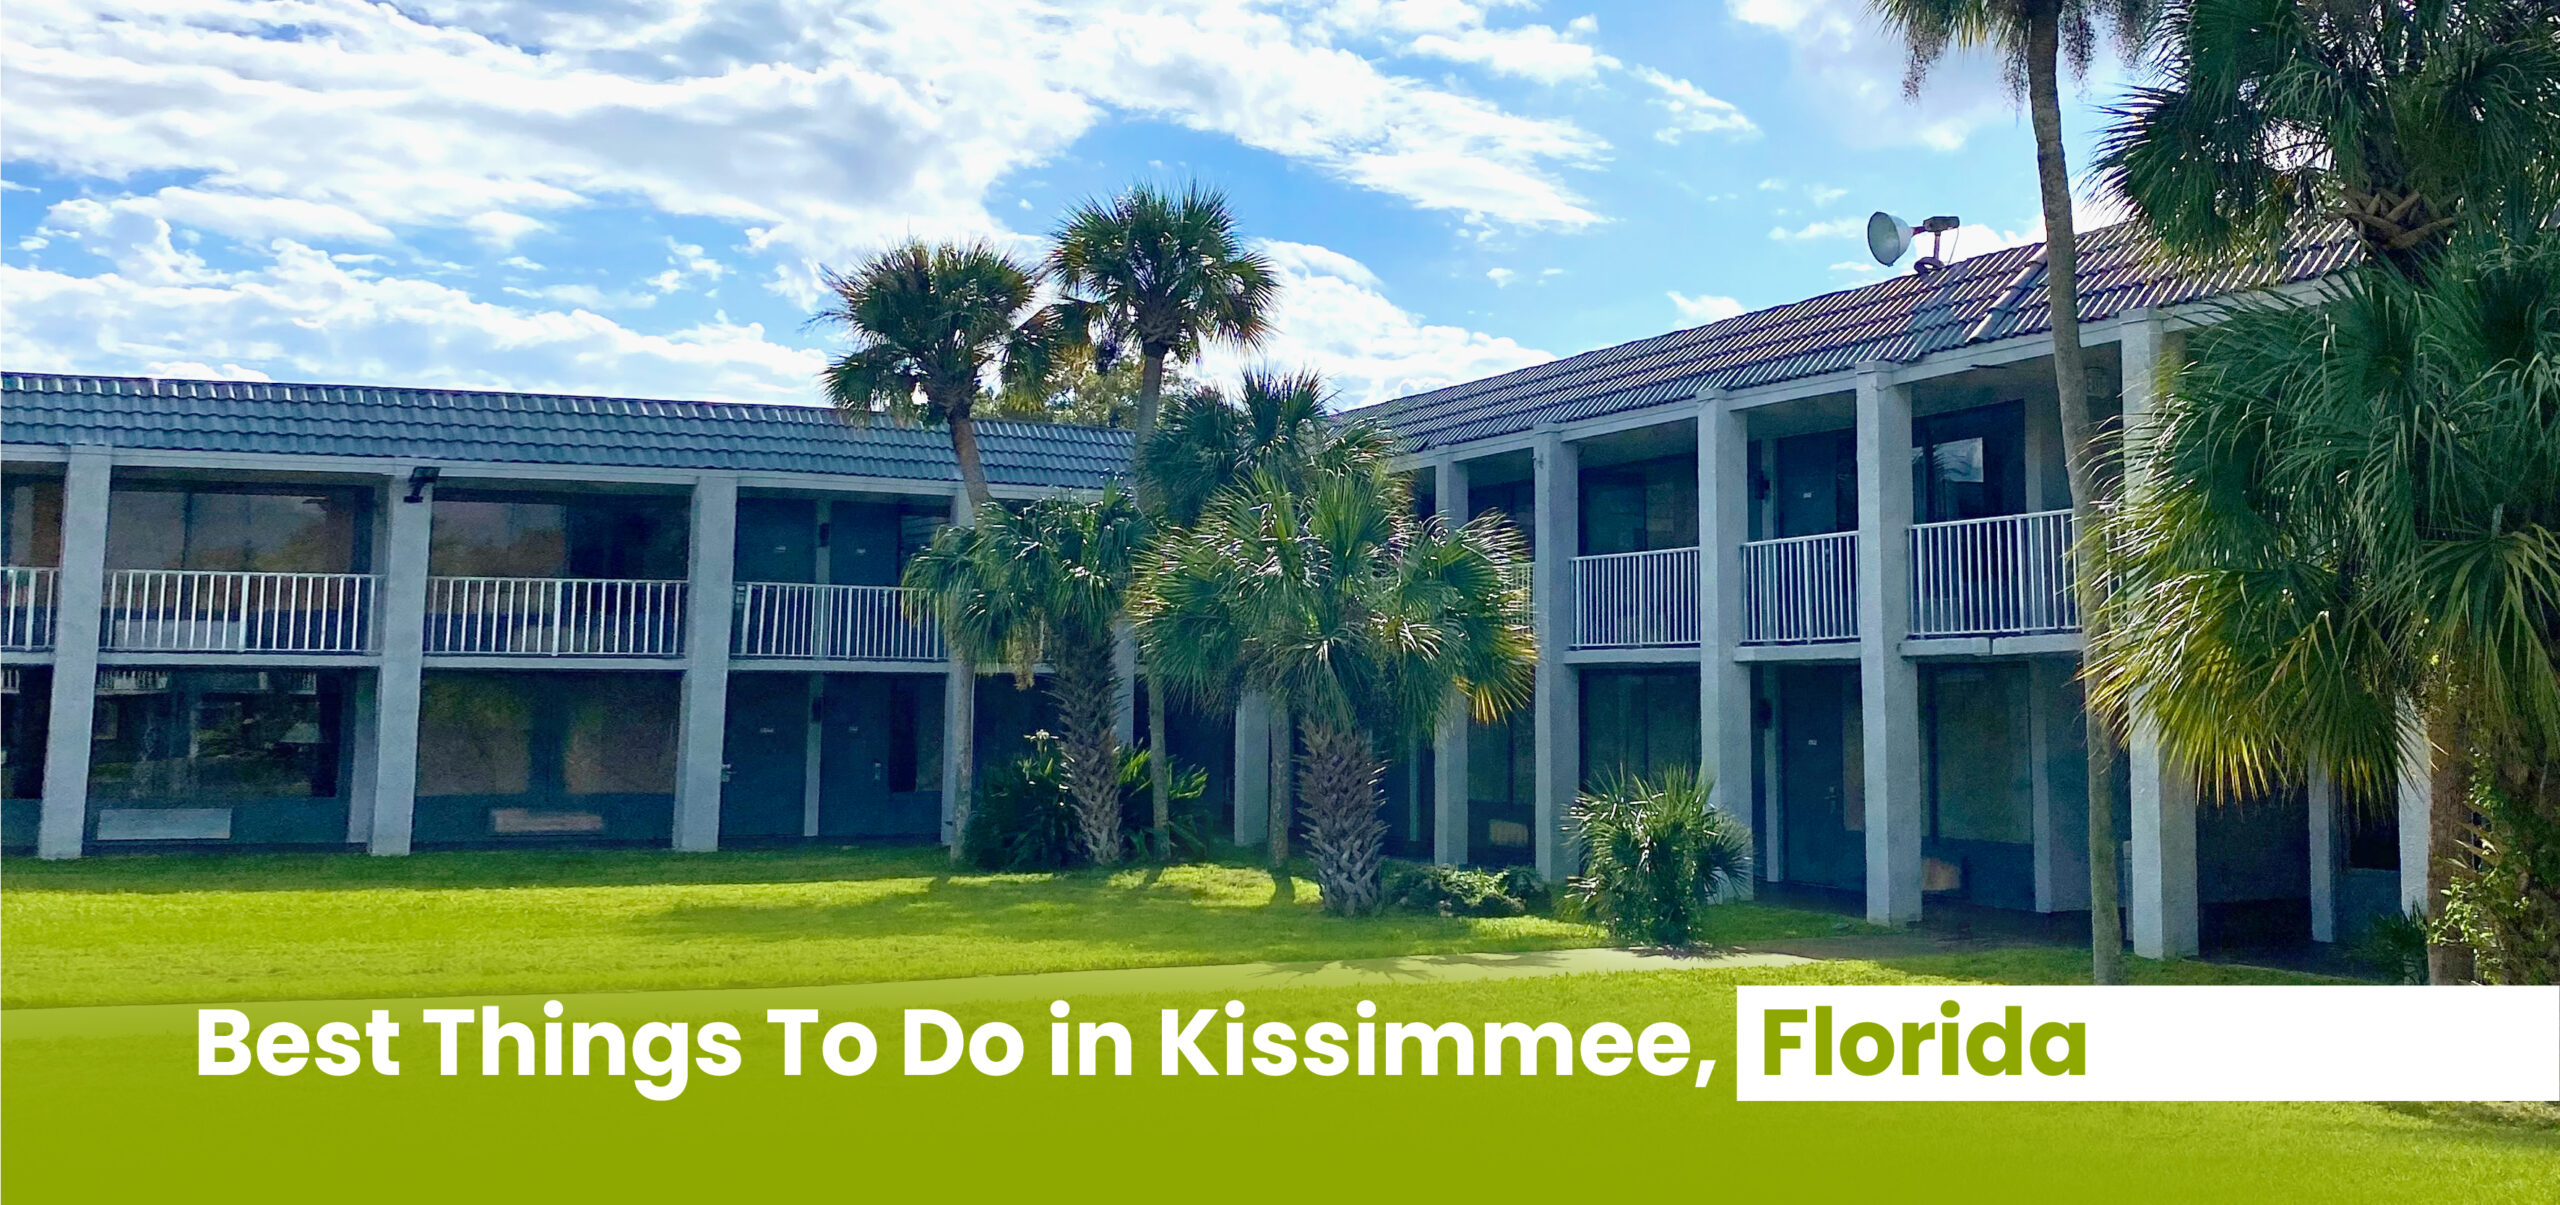 Best Things To Do in Kissimmee, Florida